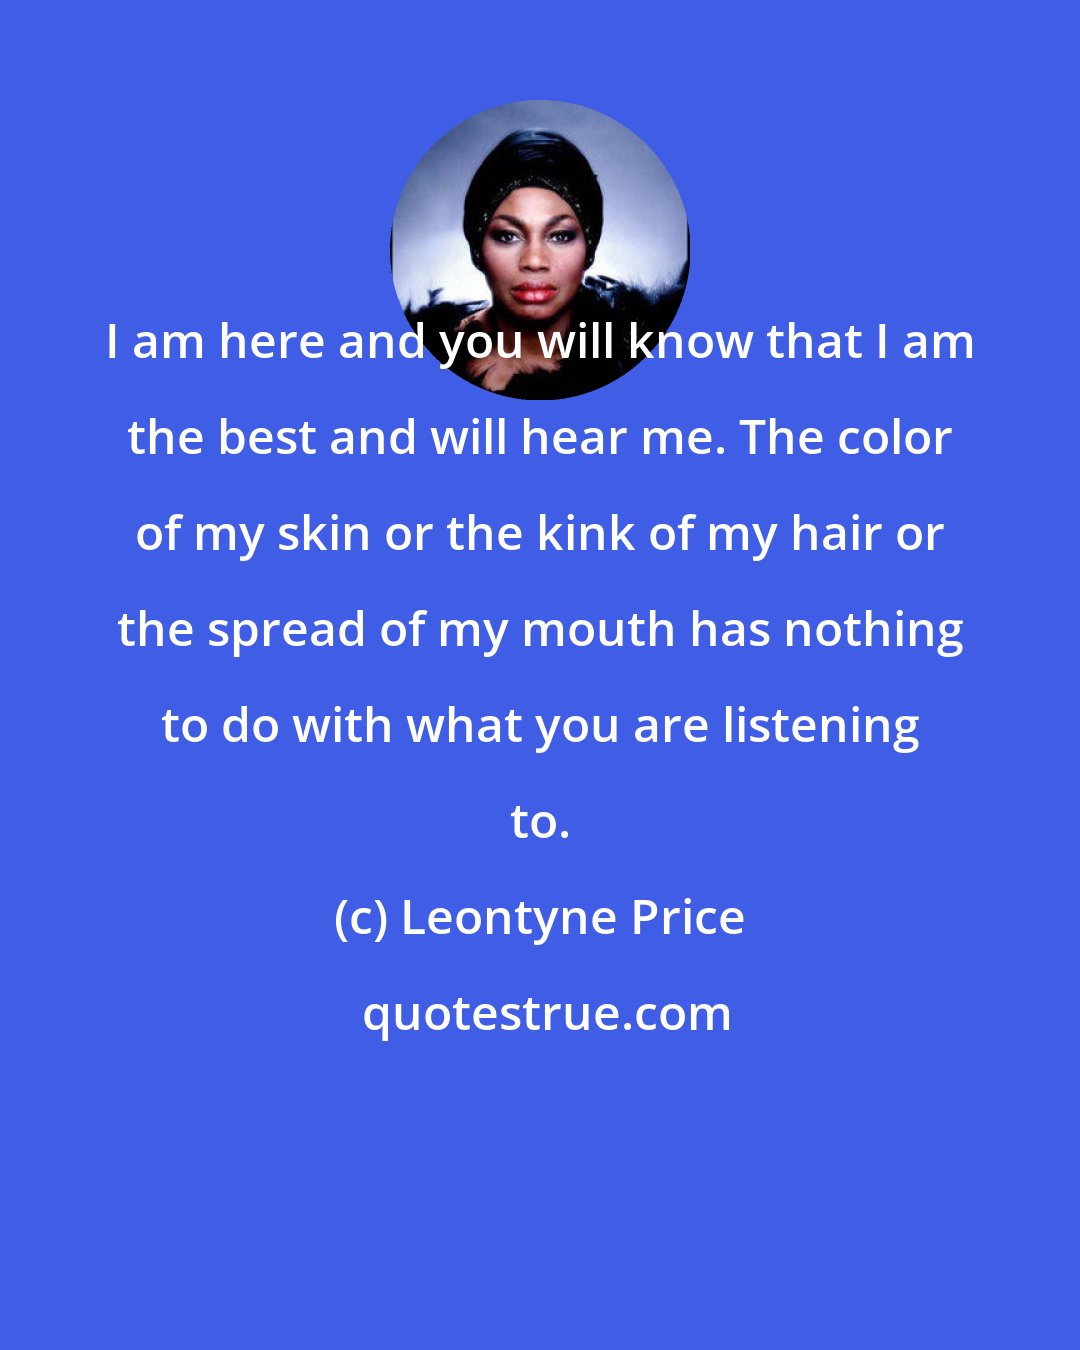 Leontyne Price: I am here and you will know that I am the best and will hear me. The color of my skin or the kink of my hair or the spread of my mouth has nothing to do with what you are listening to.